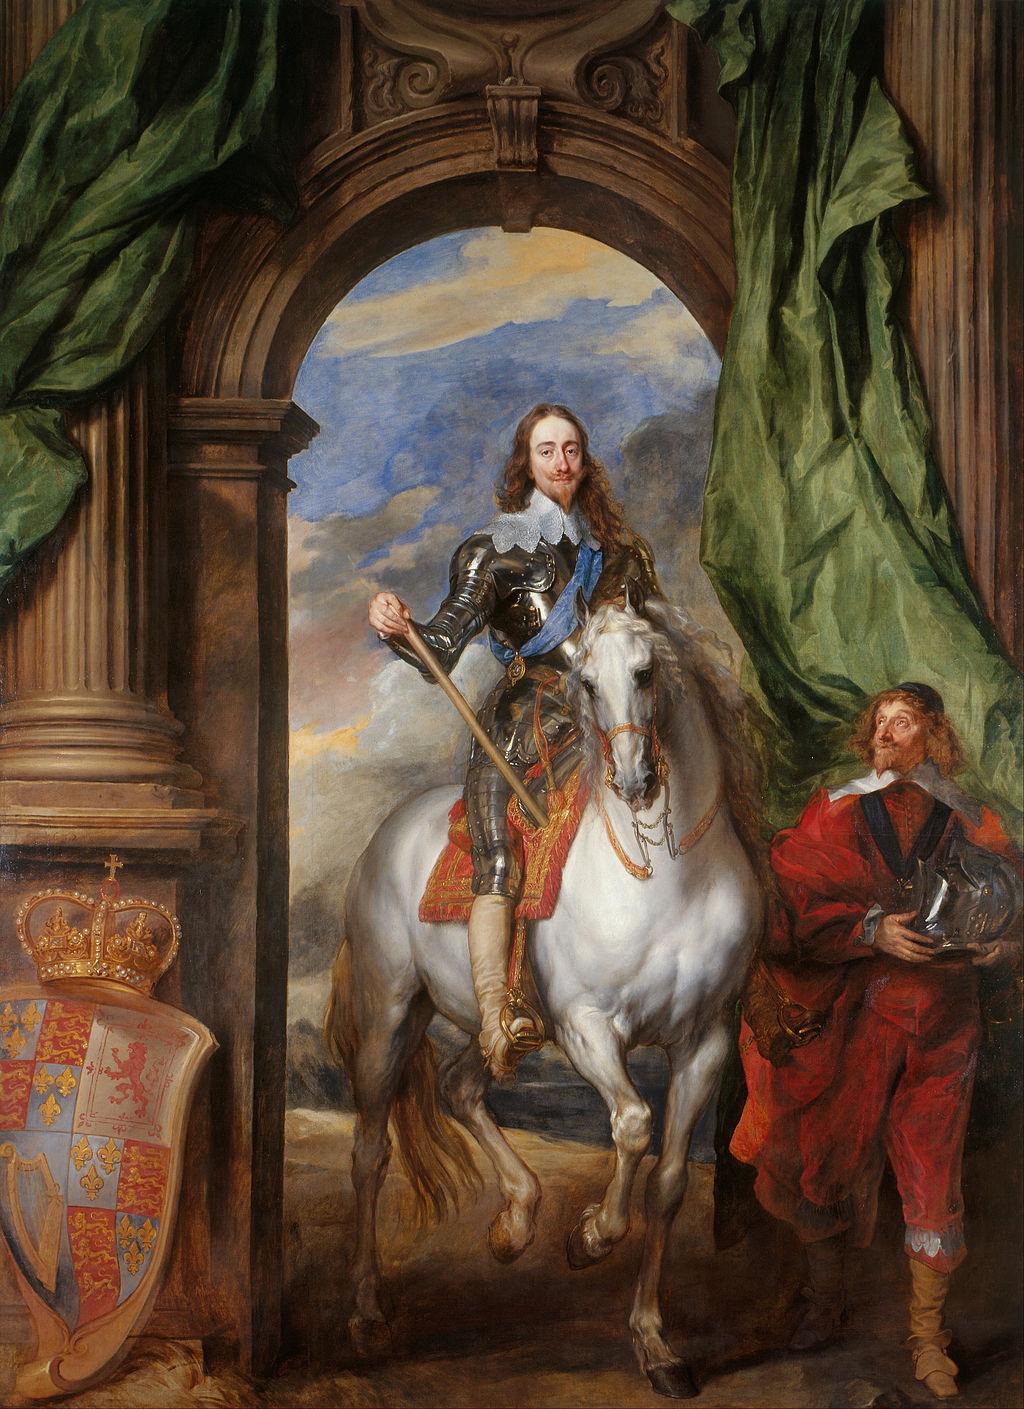 Anthony van Dyck’s ‘Charles I with M de St Antoine’ was the first equestrian portrait of the King painted by the Flemish artist